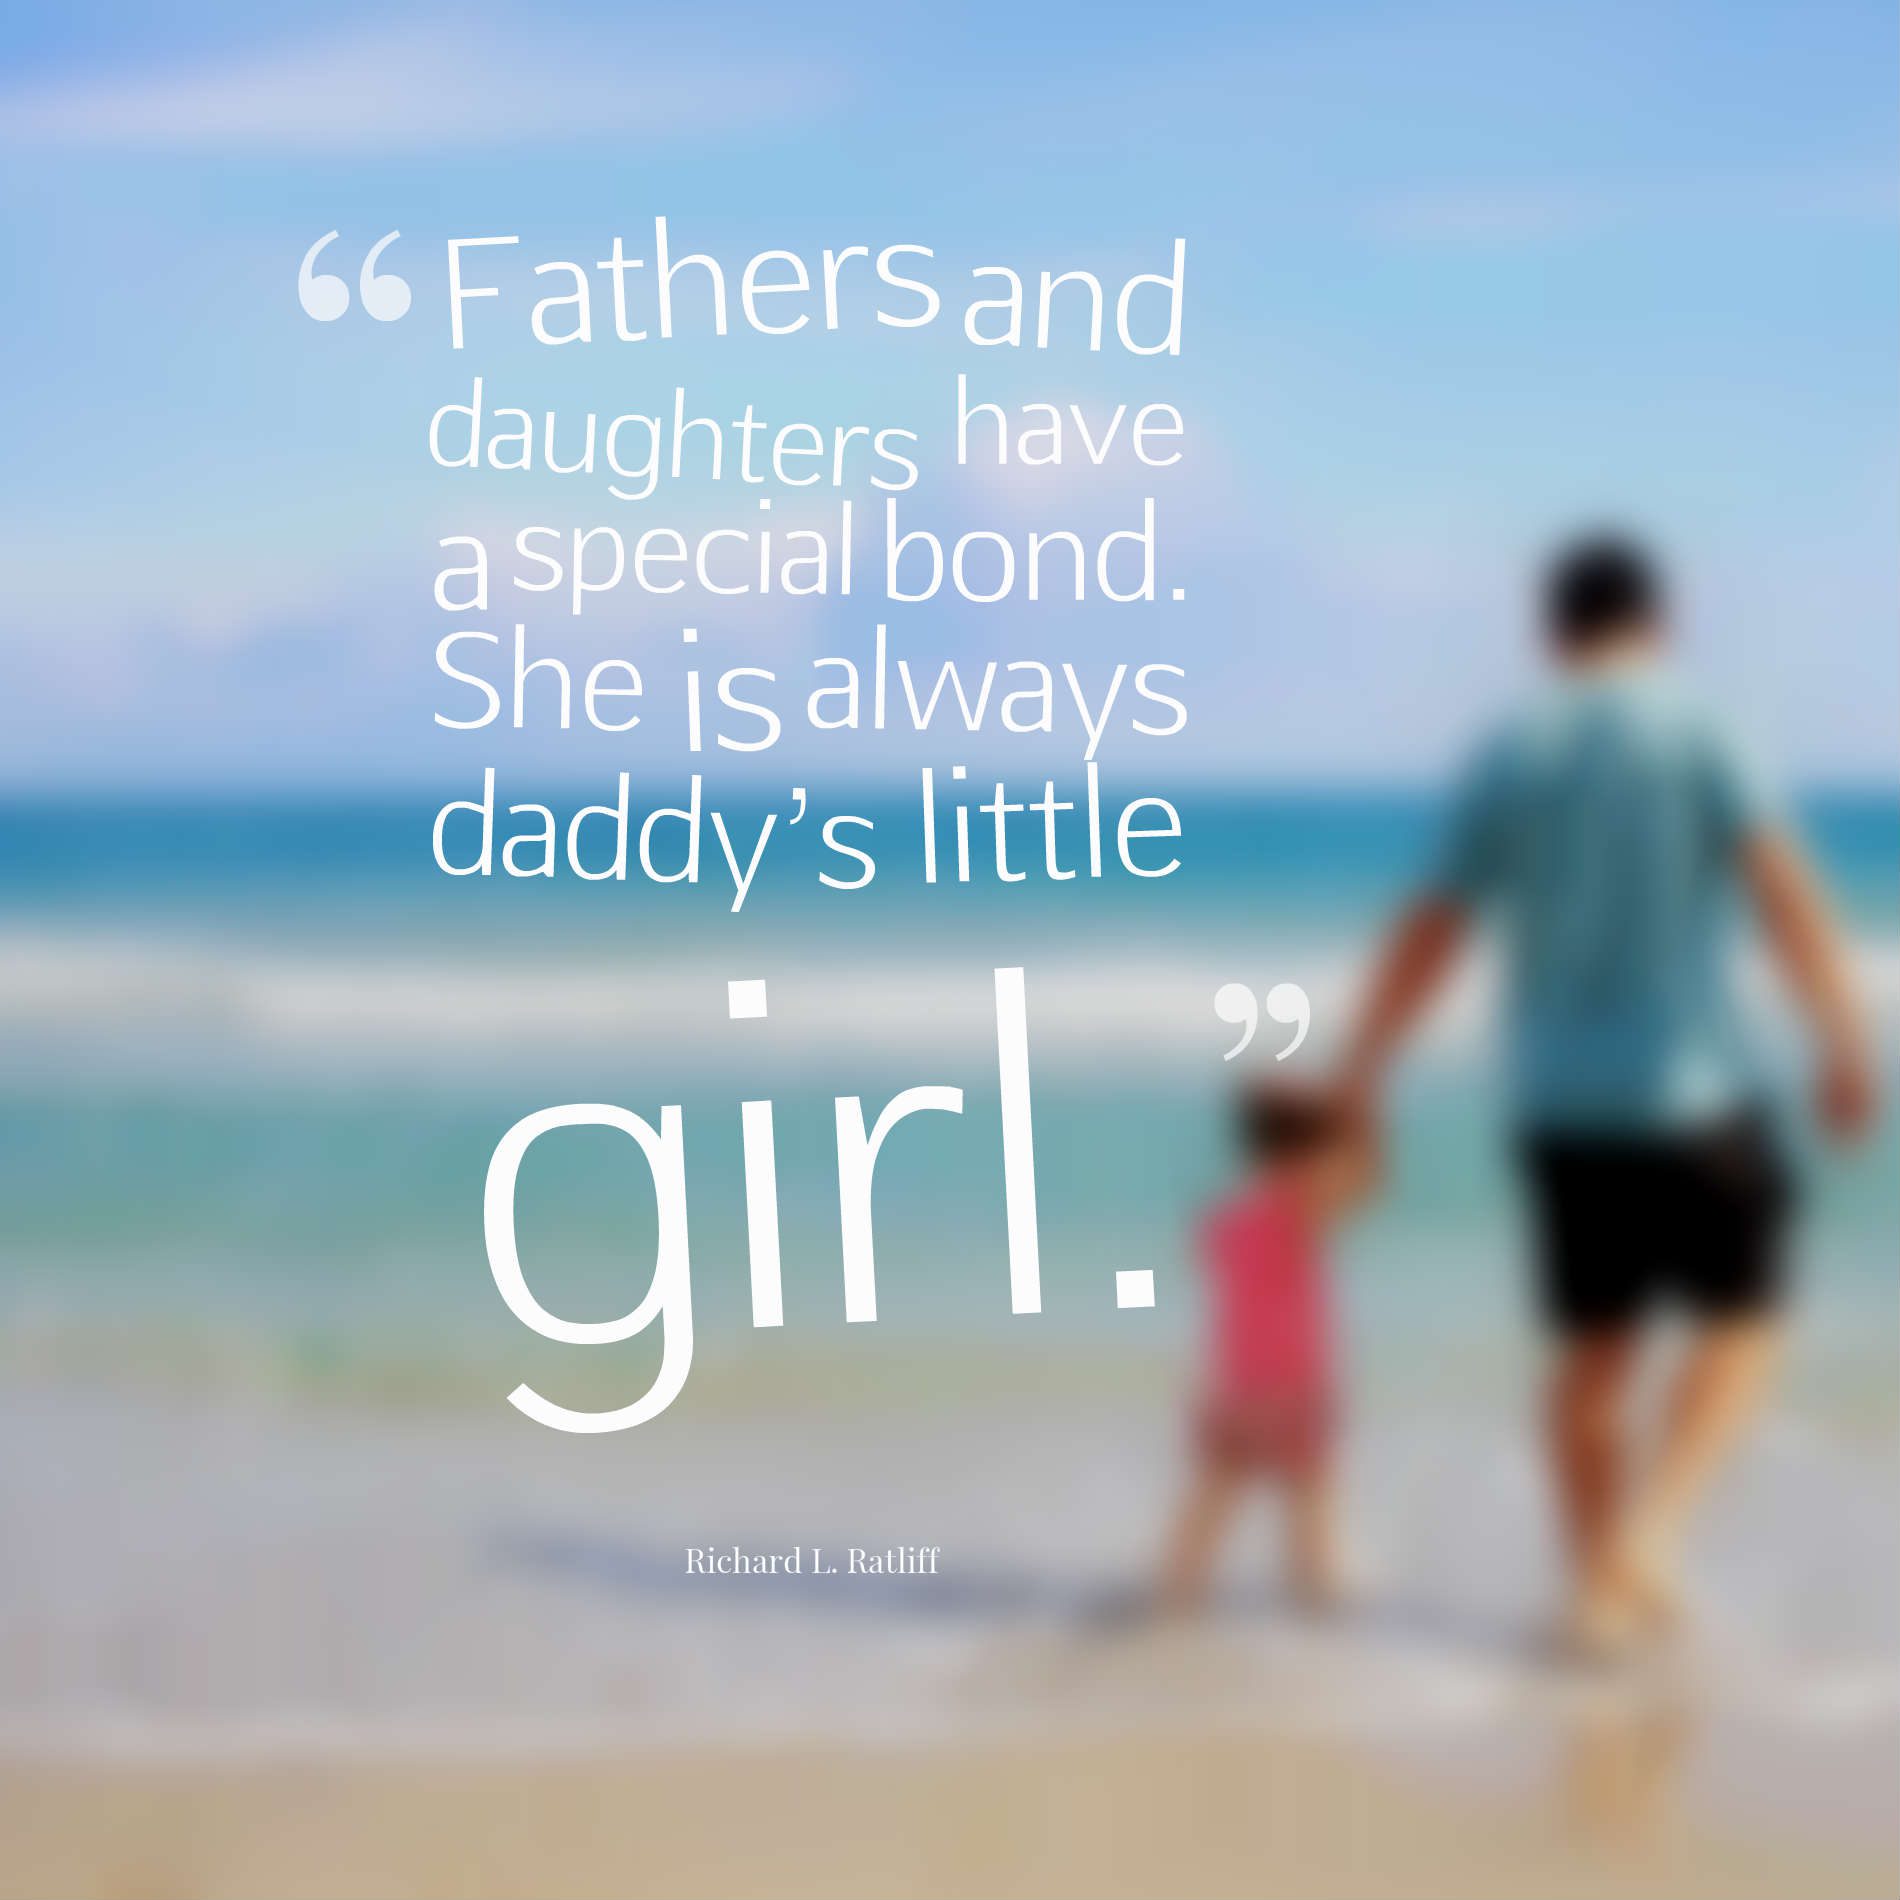 Fathers and daughters have a special bond. She is always daddy’s little girl.